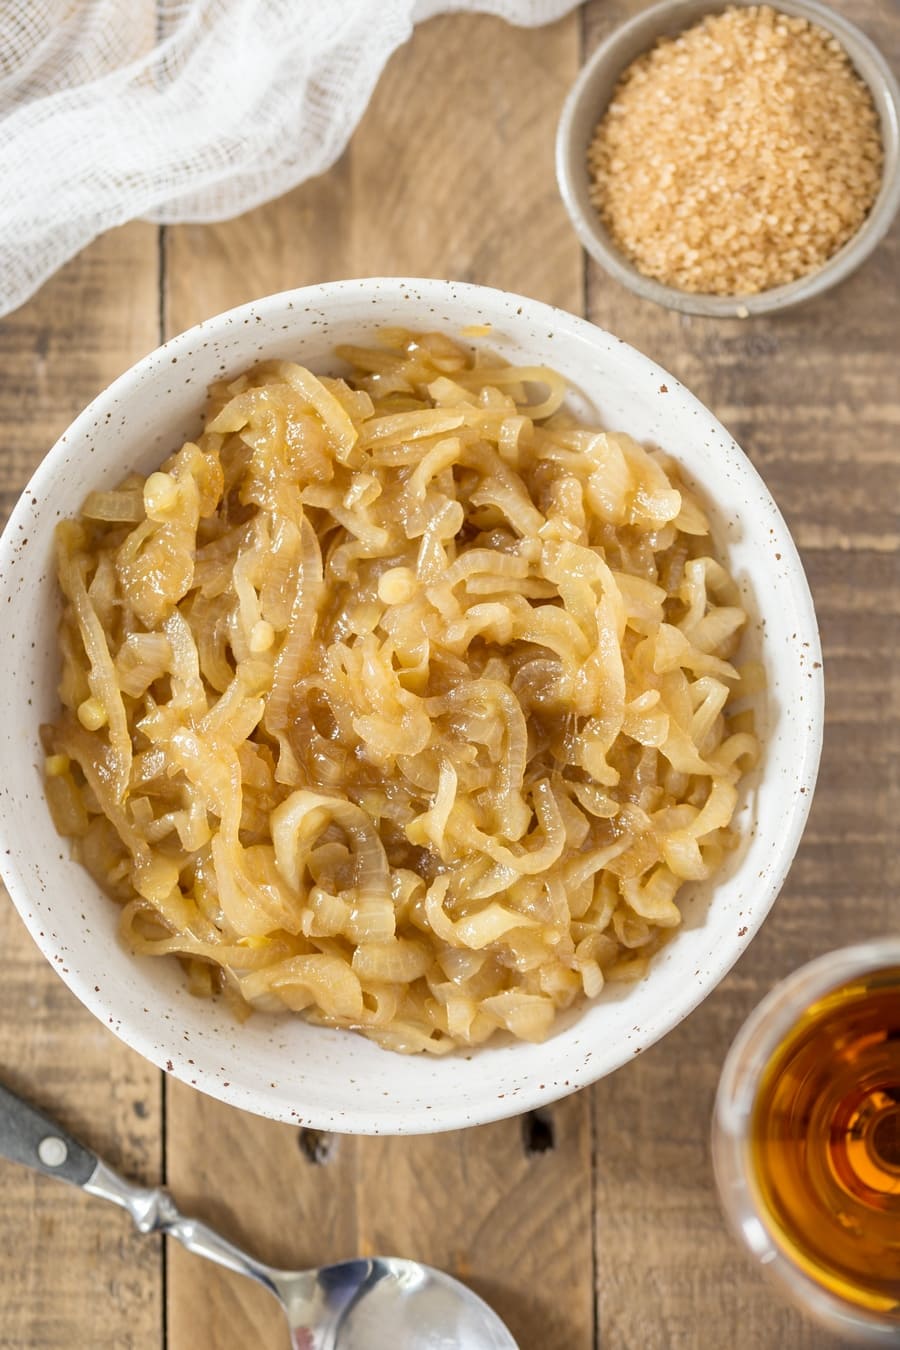 Overhead view of marsala caramelized onions in a bowl.